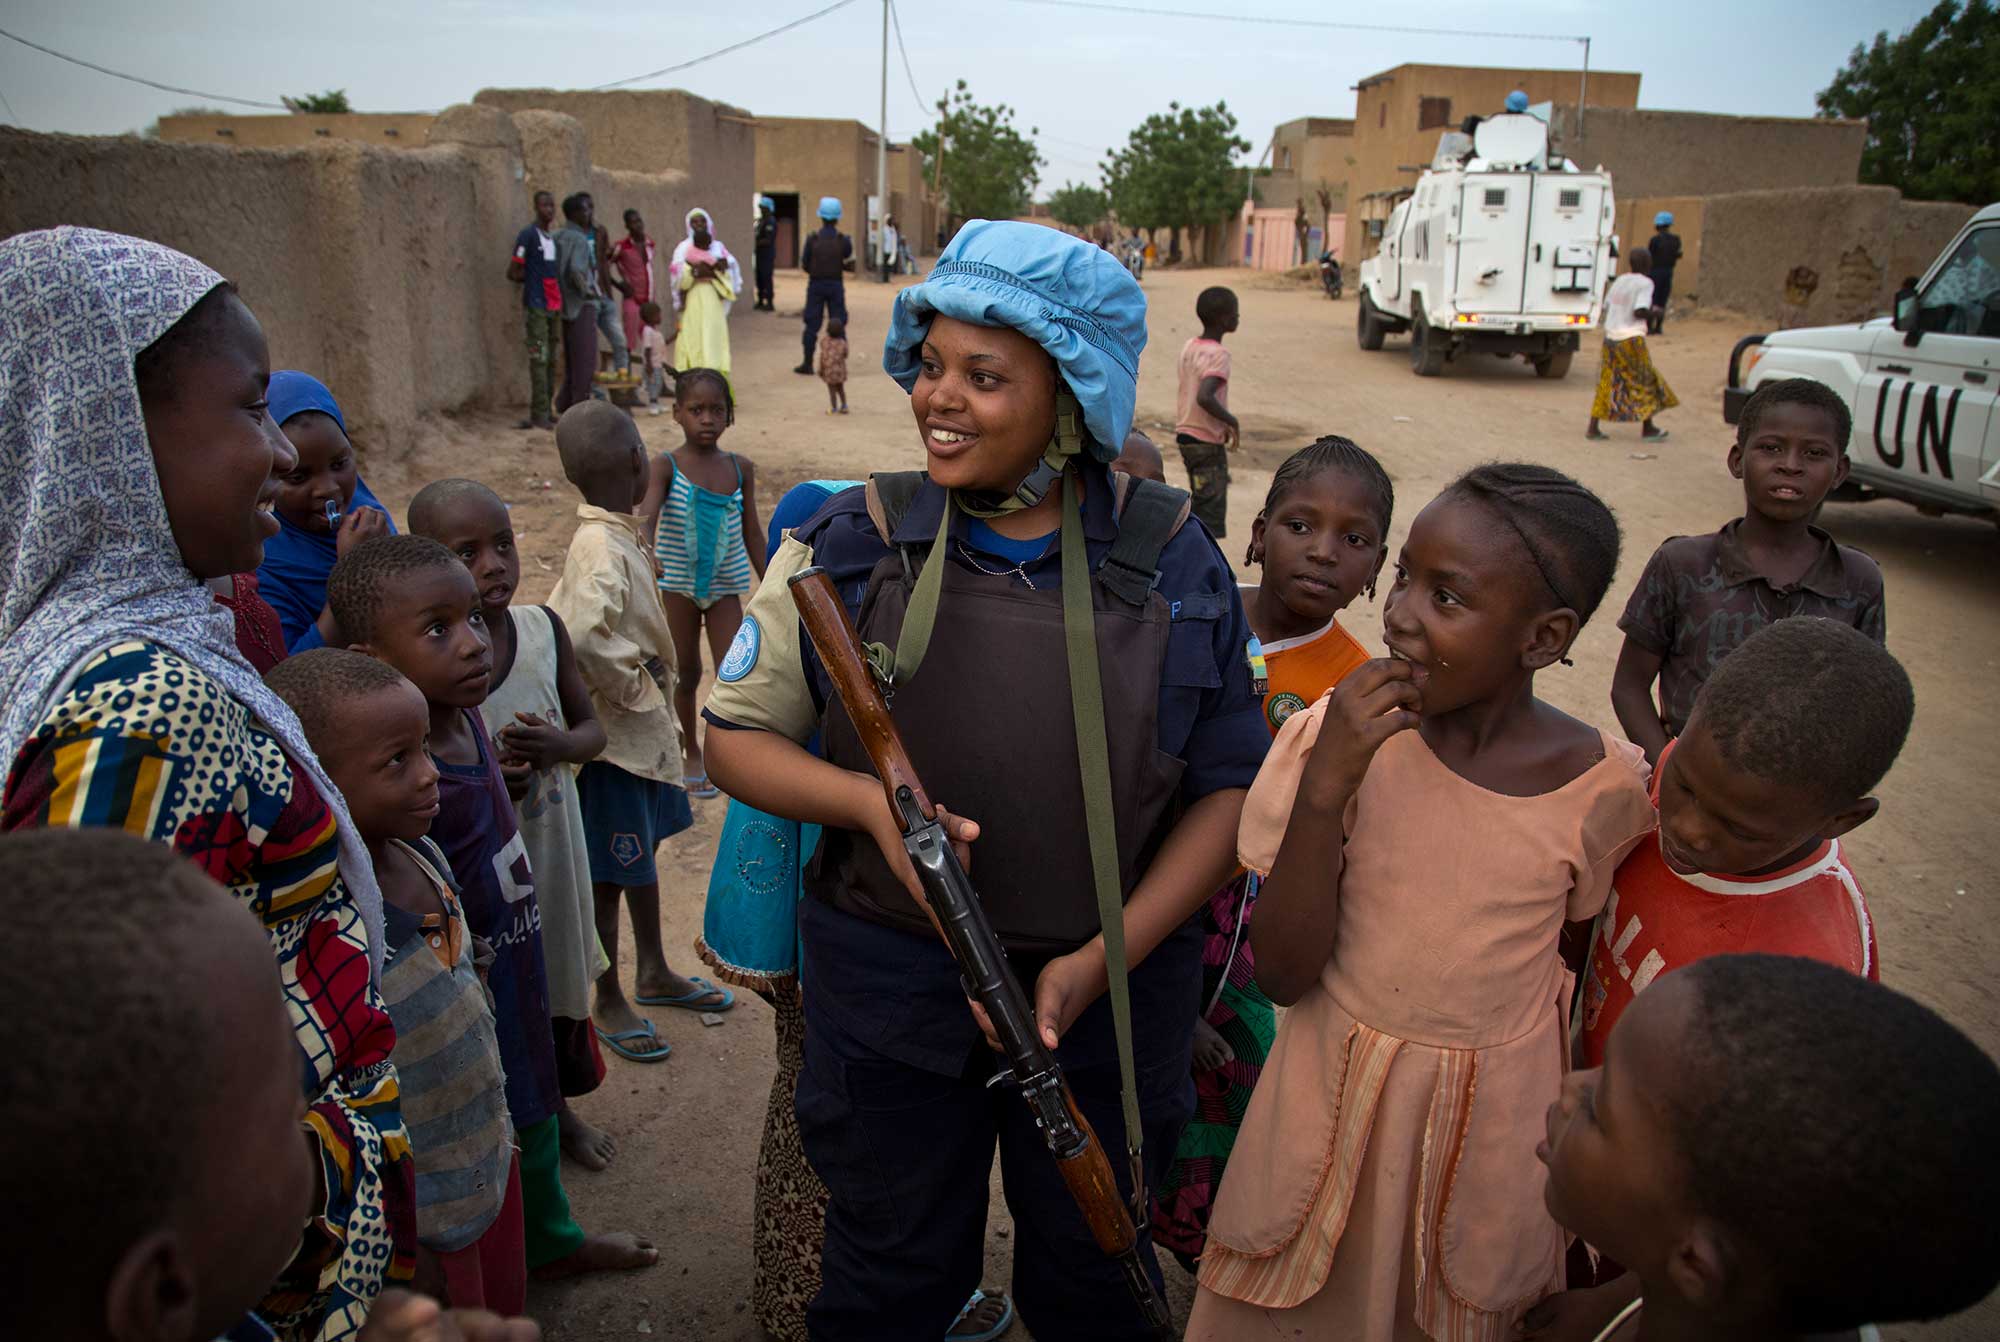 MINUSMA FPU Officers from Rwanda speak to the population as they patrol the streets of Gao, North of Mali. Photo: UN Peacekeeping